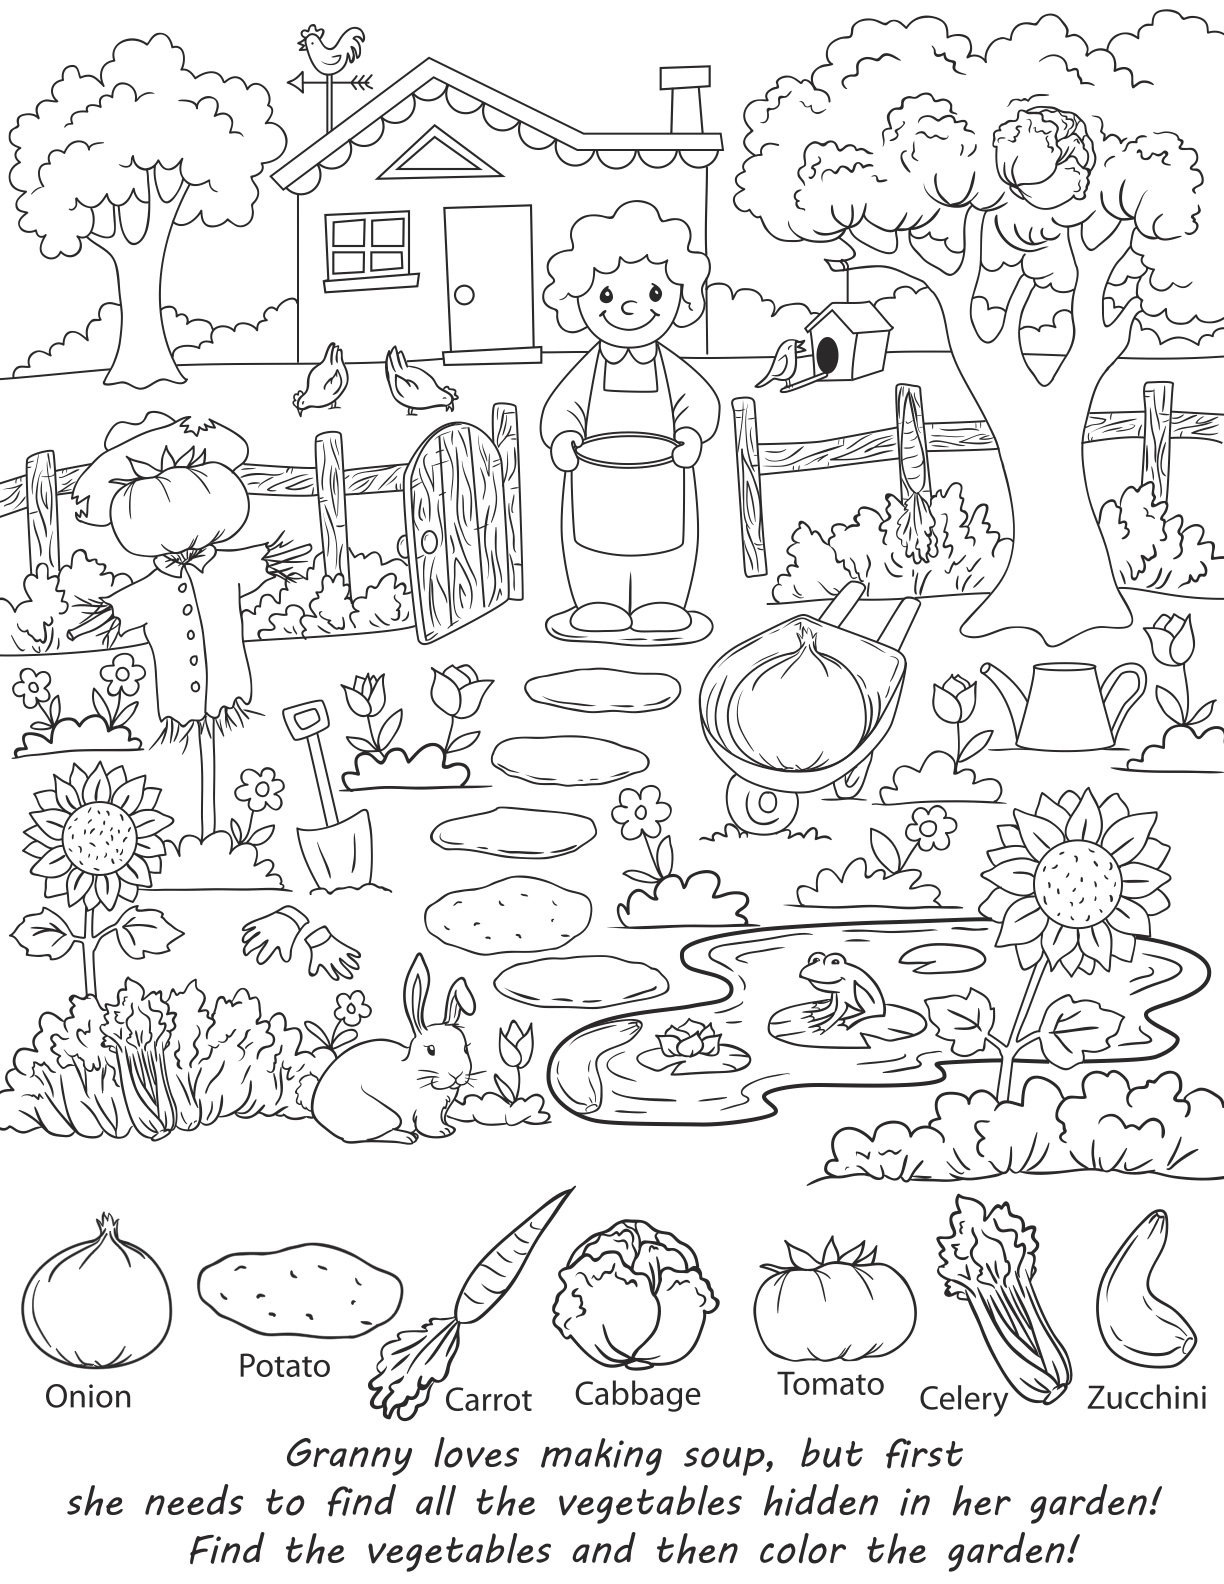 Seek And Find Coloring Pages at GetDrawings Free download